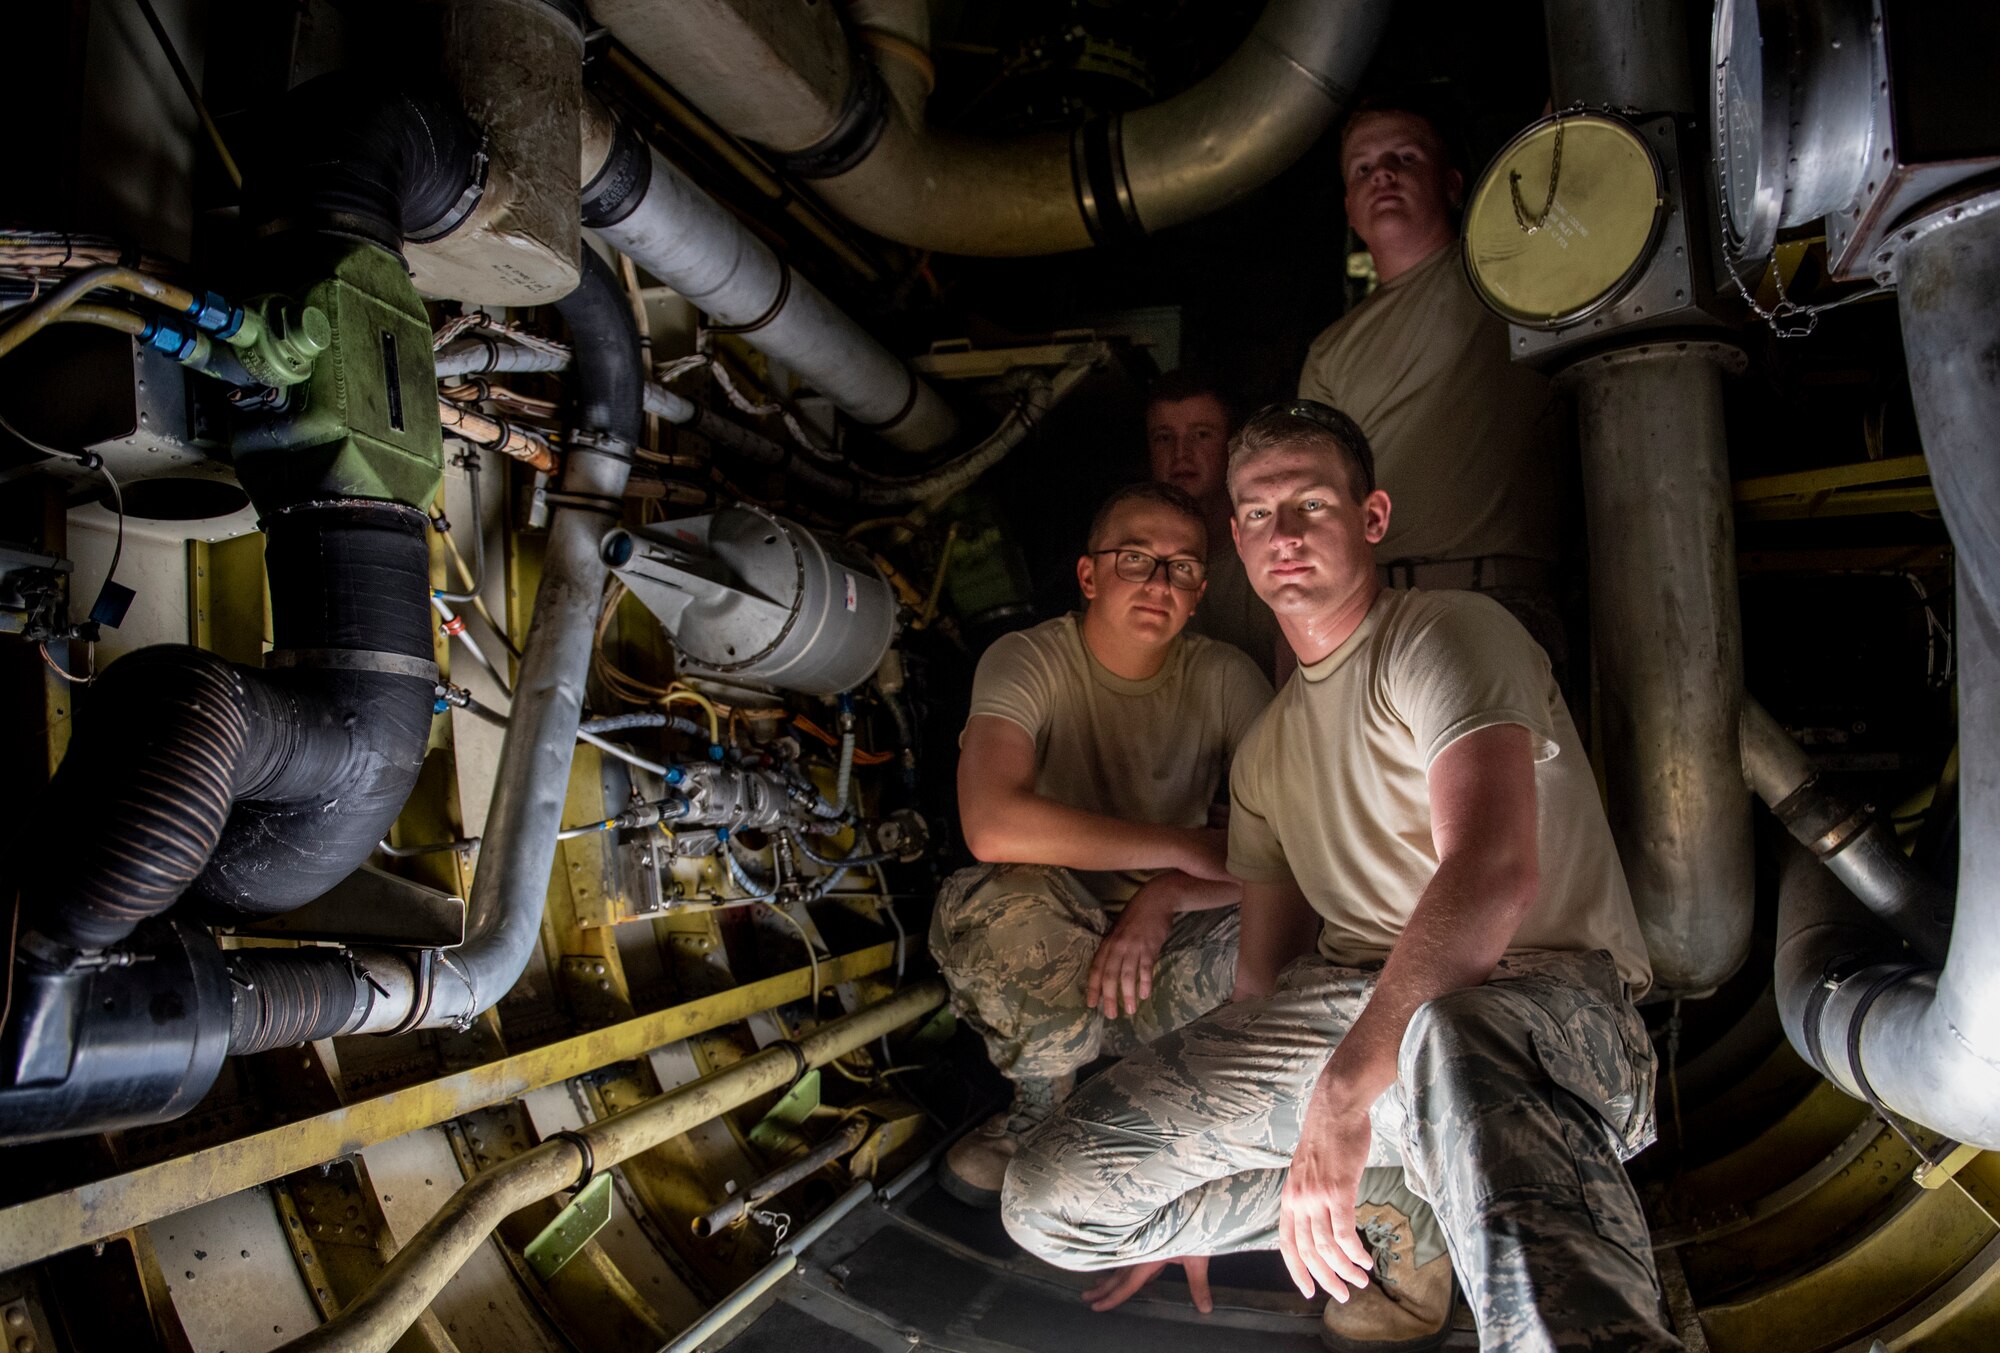 From left, Airman Greg Hogle, Airman 1st Class Daniel Miranda, Airman George Michael Singer III and Airman Brycen Brooks, 362nd Training Squadron B-52 crew chief apprentice course students, pose for a picture inside a B-52 Stratofortress at Sheppard Air Force Base, Texas, July 2, 2019. The students just started their training recently, but already love their work and are loyal to the B-52. Their love for their mission allows them to work inside the belly of the aircraft even though it traps hot air inside, making the 100 degree Texas weather outside much more desirable. (U.S. Air Force photo by Airman 1st Class Pedro Tenorio)